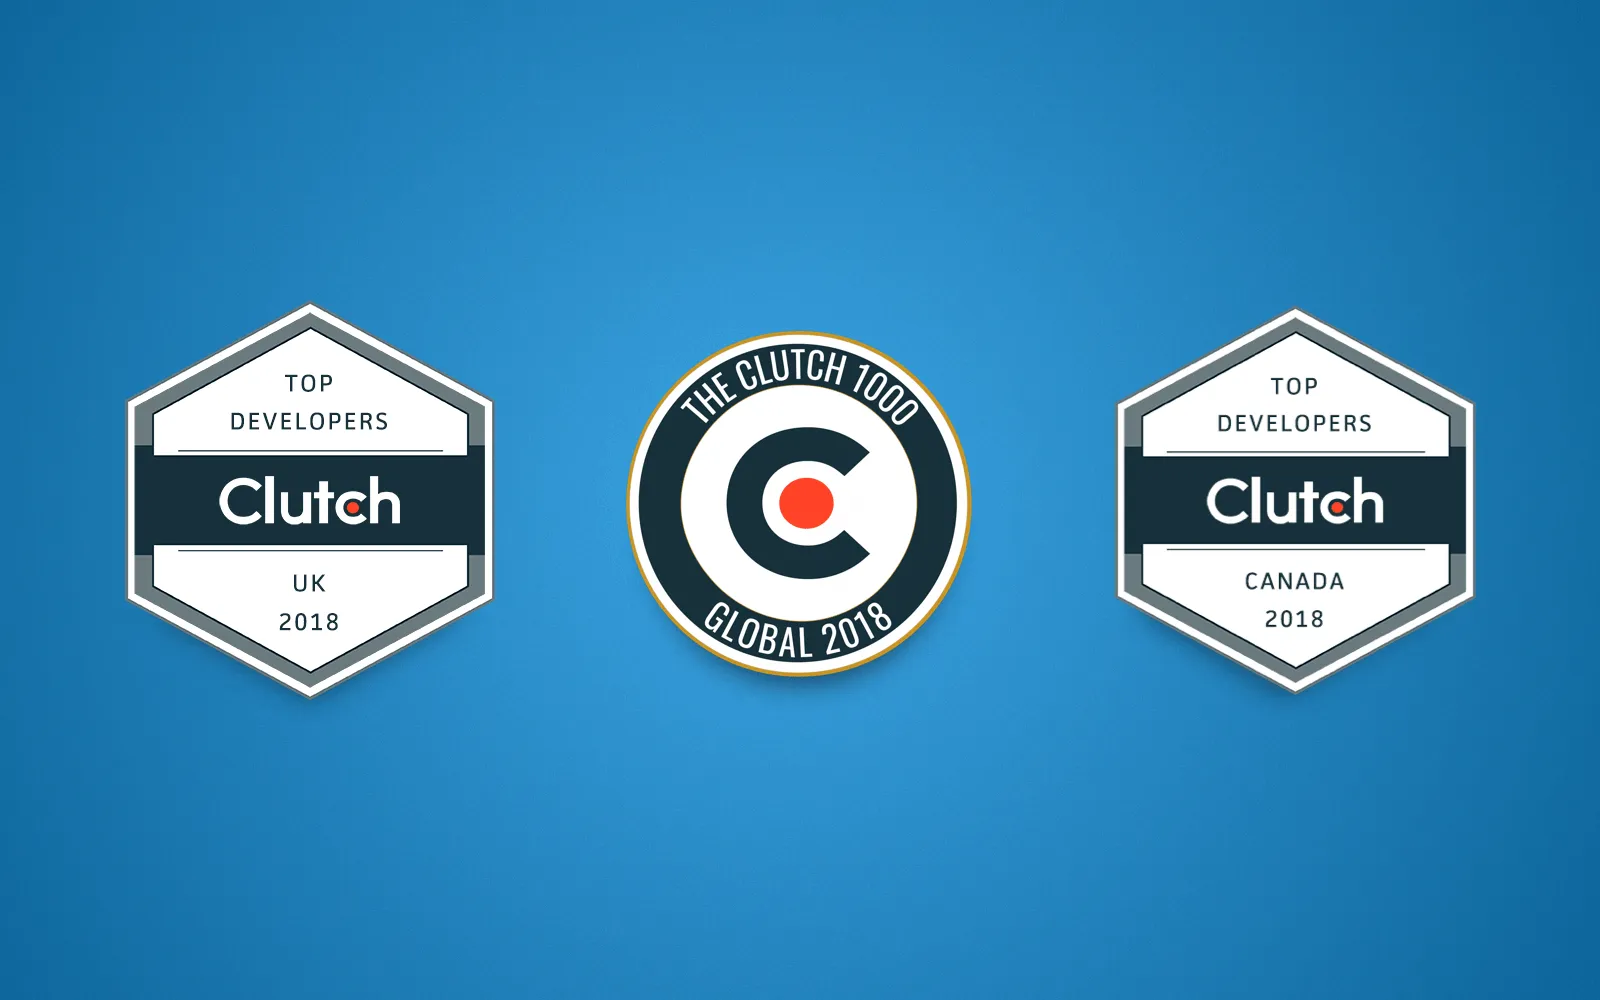 Cleveroad was recognized as Top Developer in the UK and hit the Clutch 1000 global